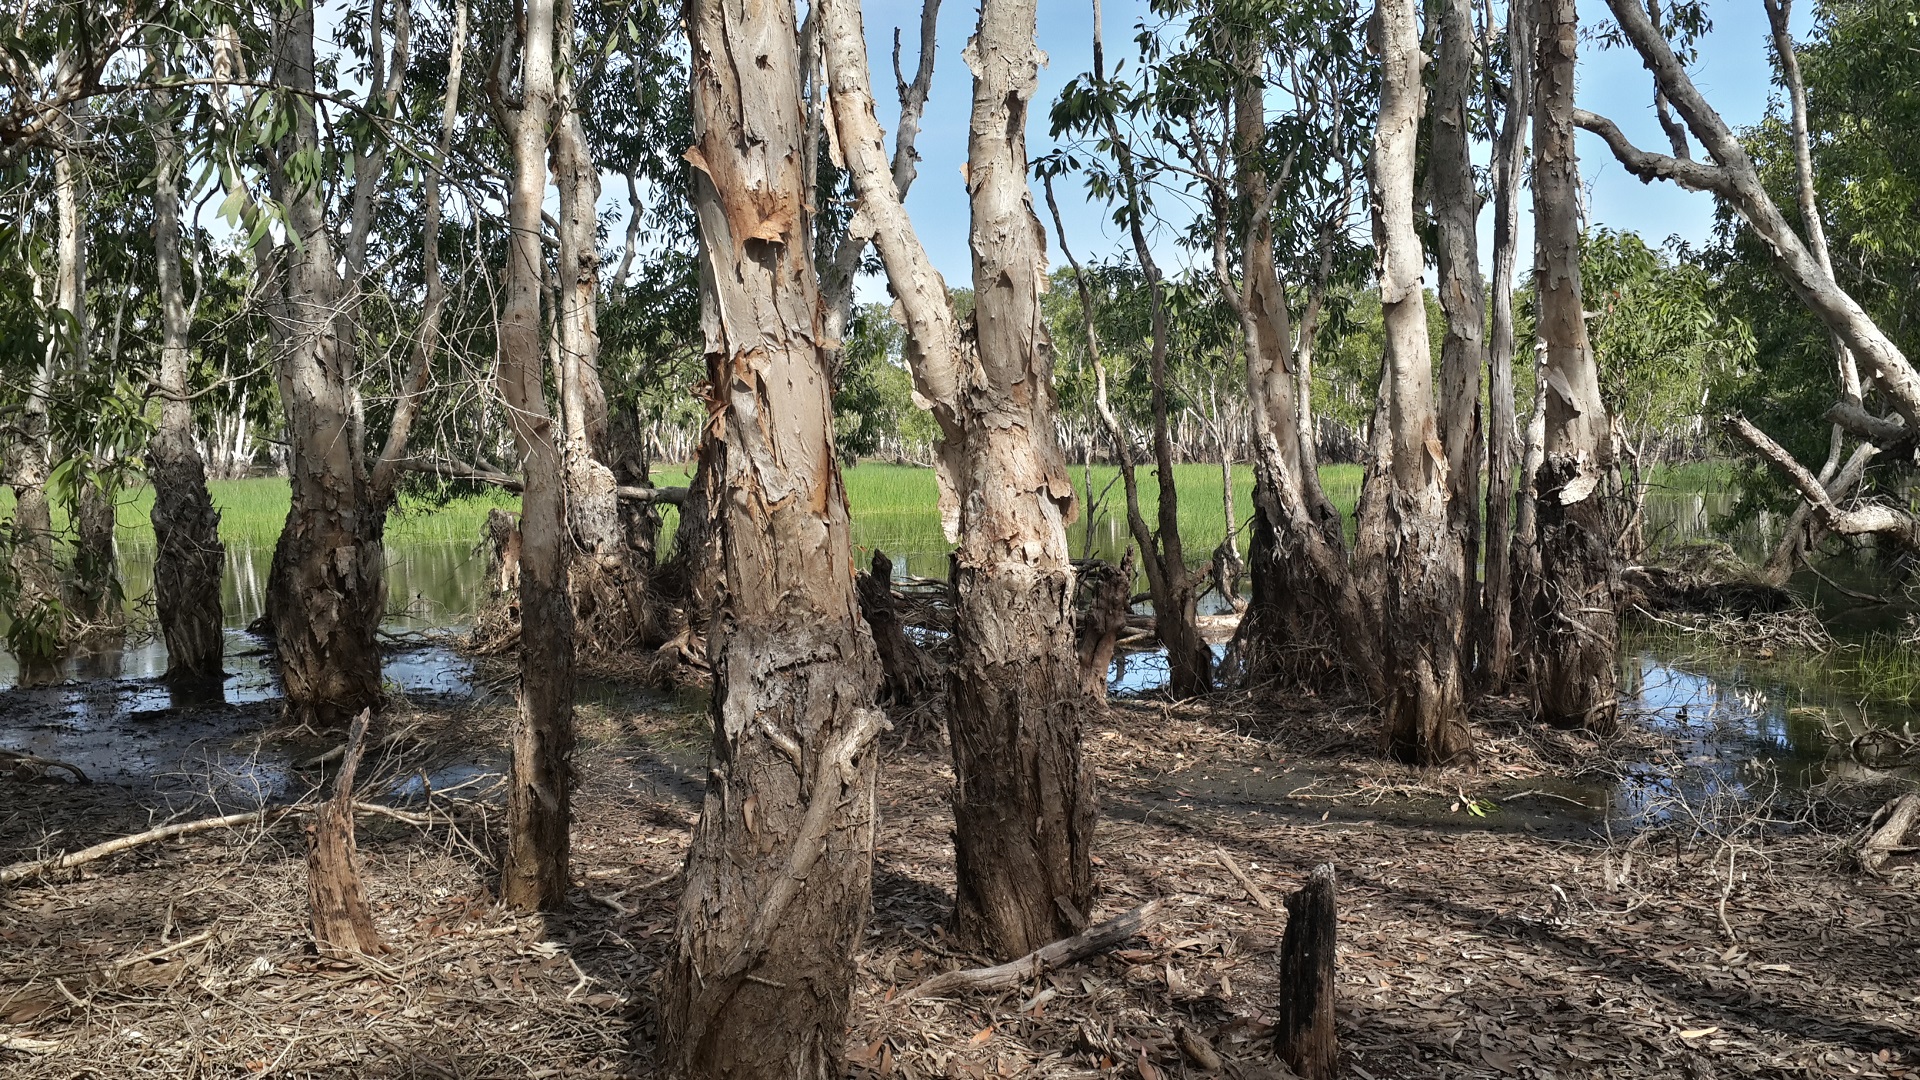 Day 12: Tabletop Swamp in Litchfield national park.